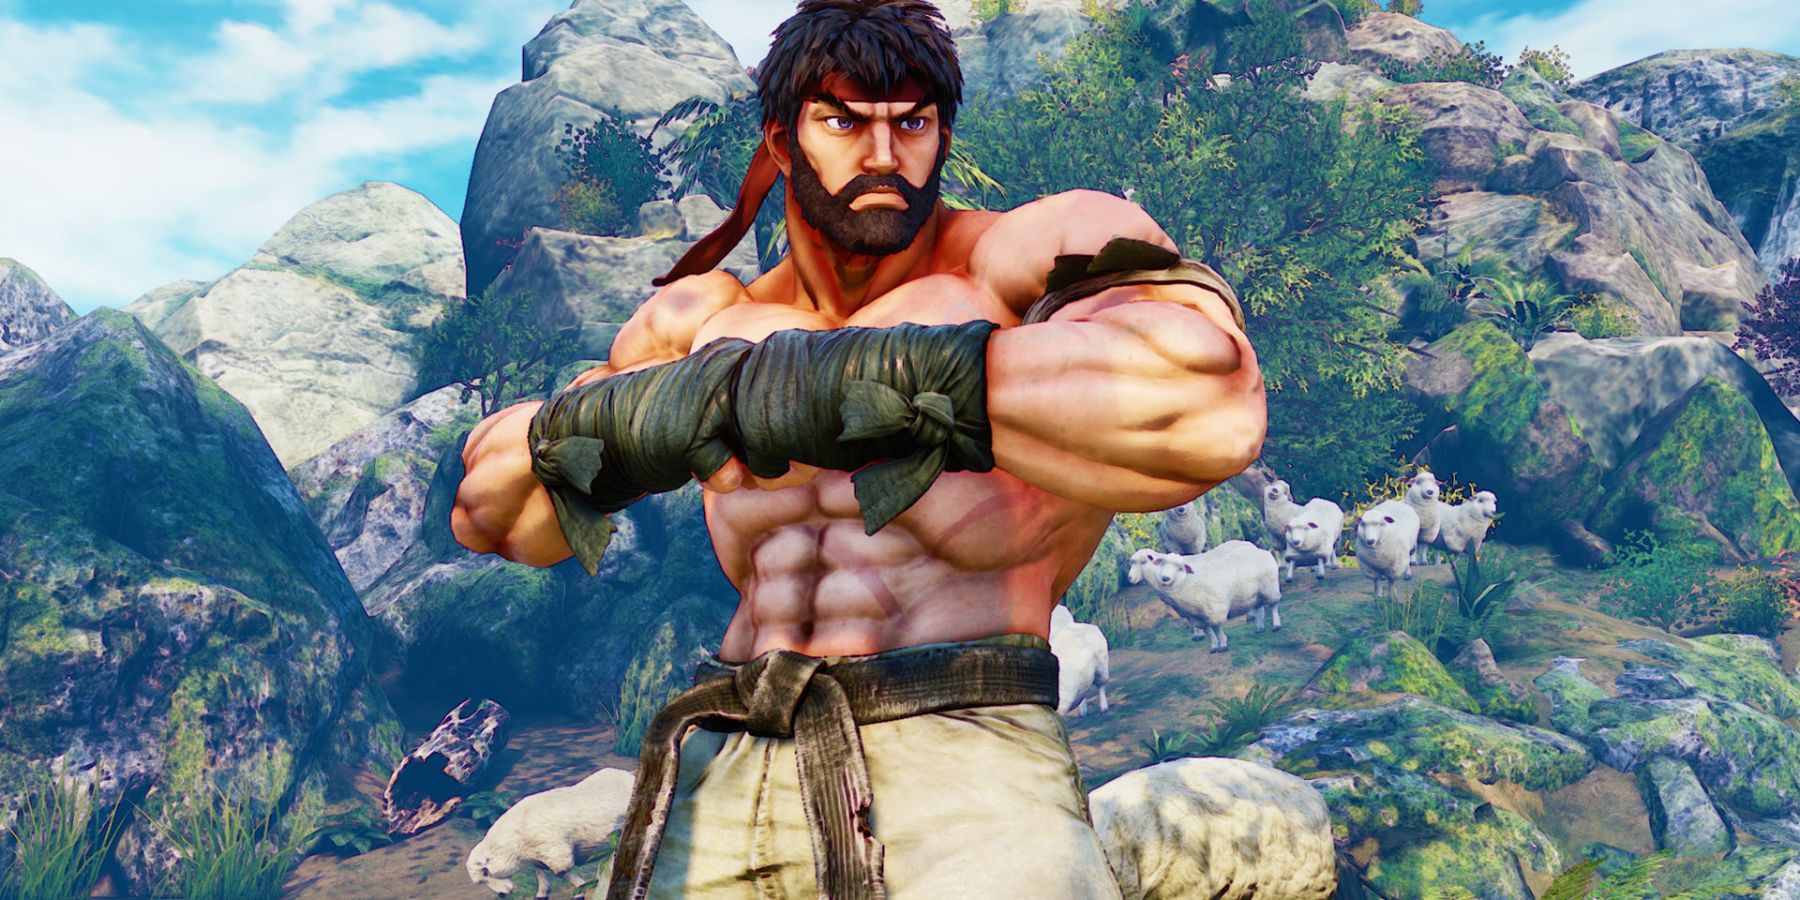 Who is stronger Ryu or Ken? Street Fighter 2 producer puts the age-old  debate to rest